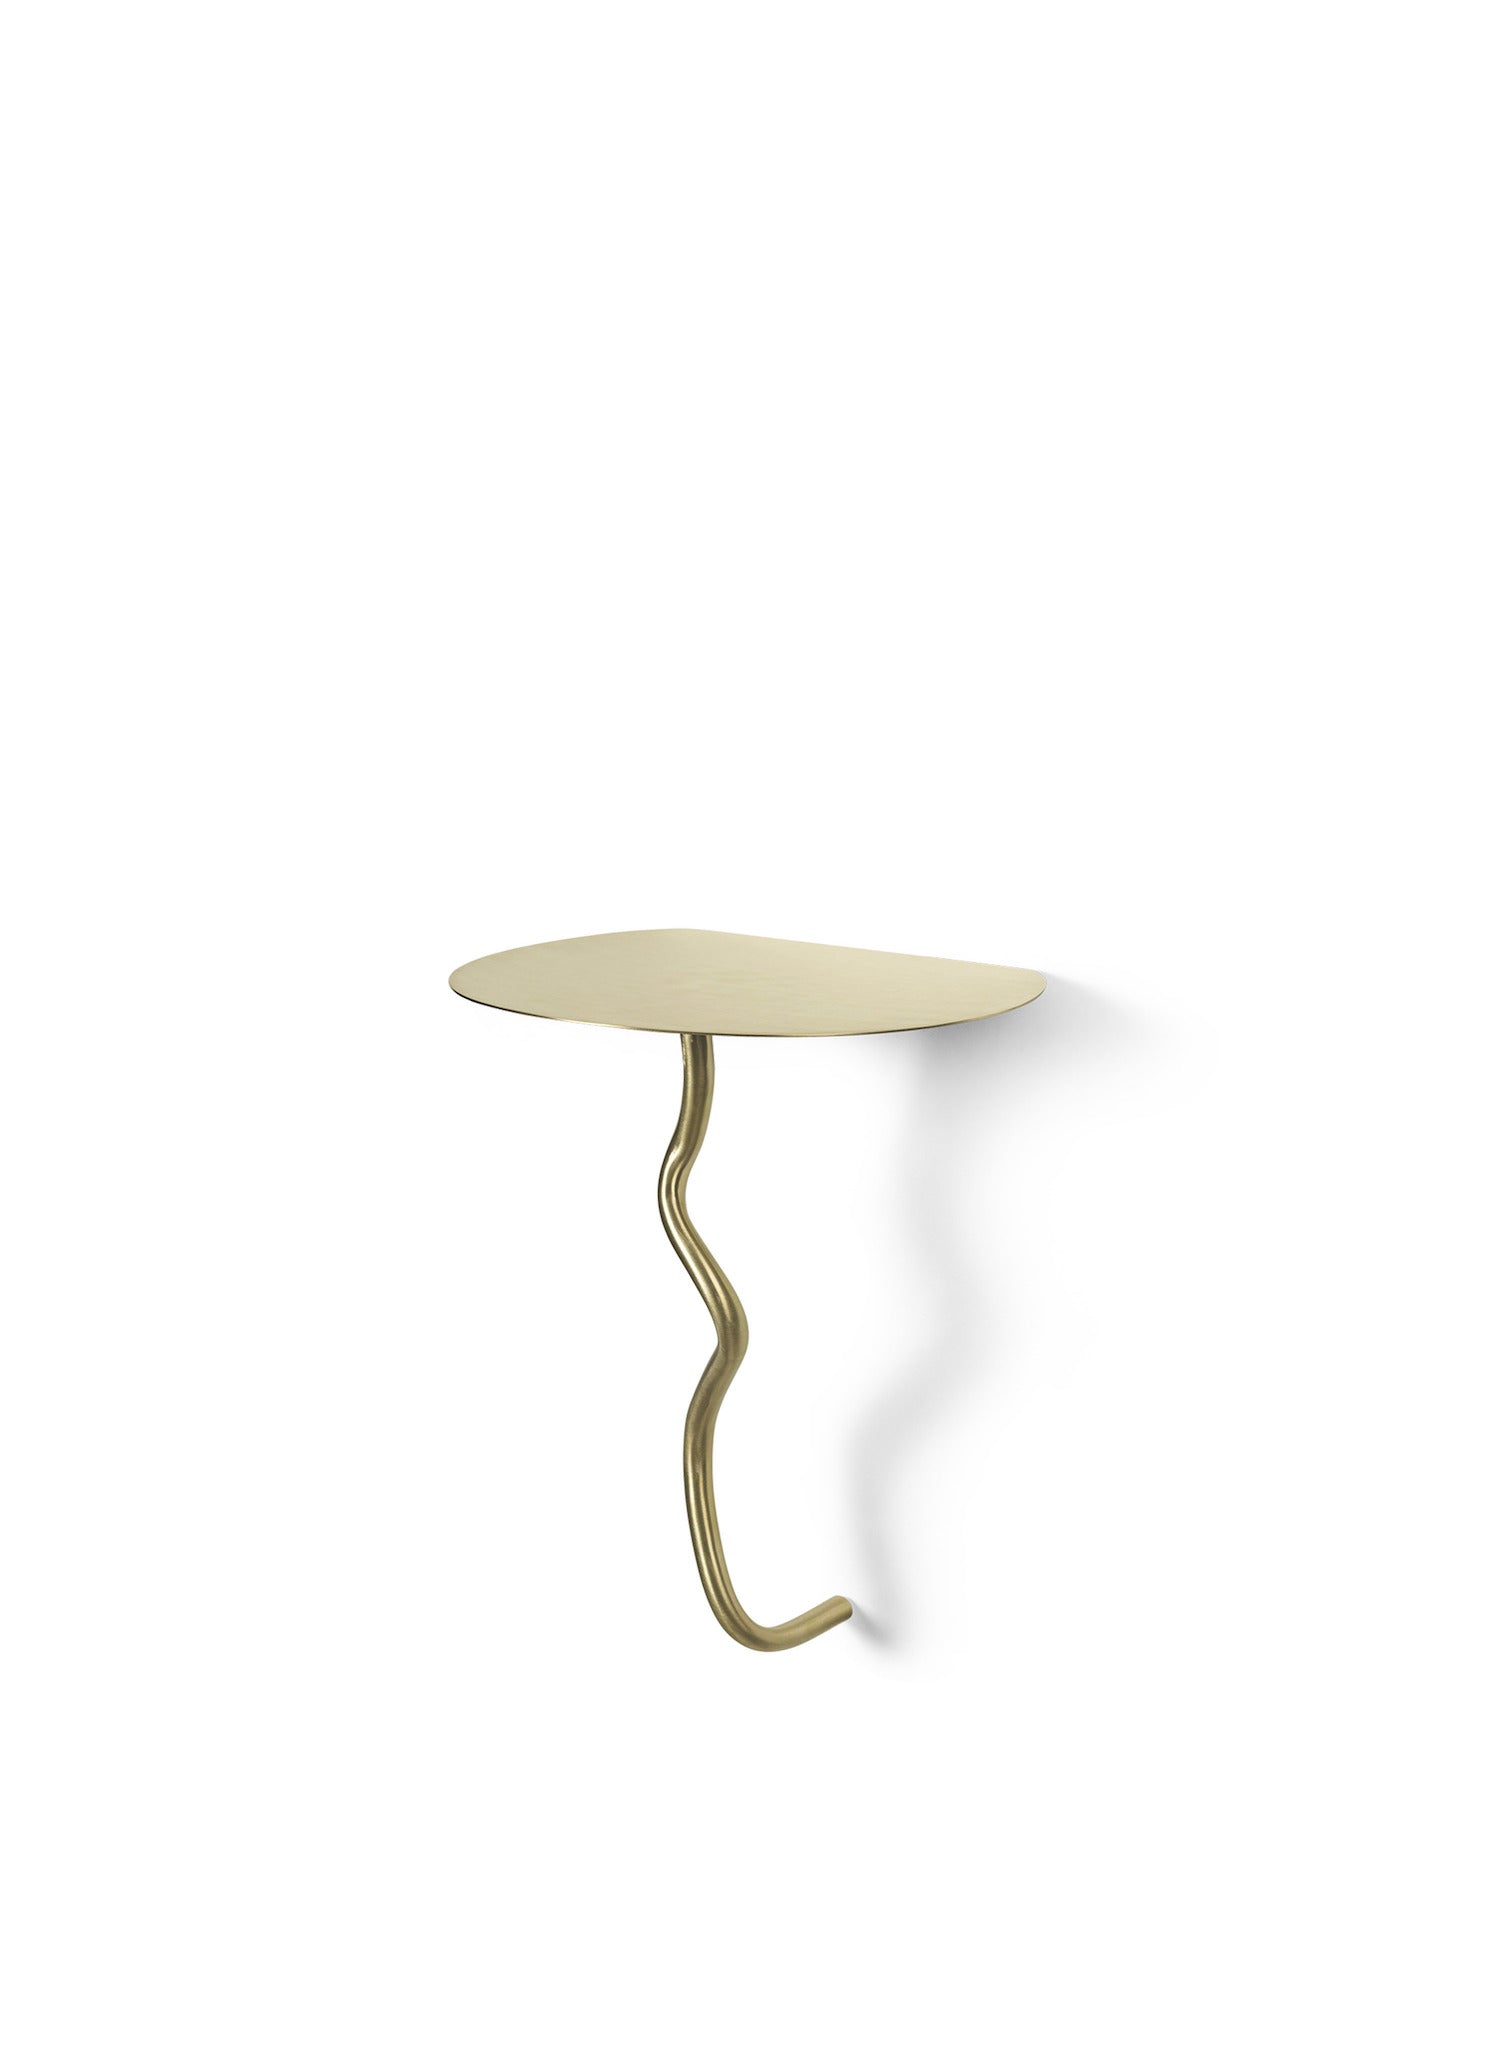 Curvature Wall Table. Inspired by jewelry, the Curvature Wall Table presents a decorative surface ideal for use in smaller spaces. 